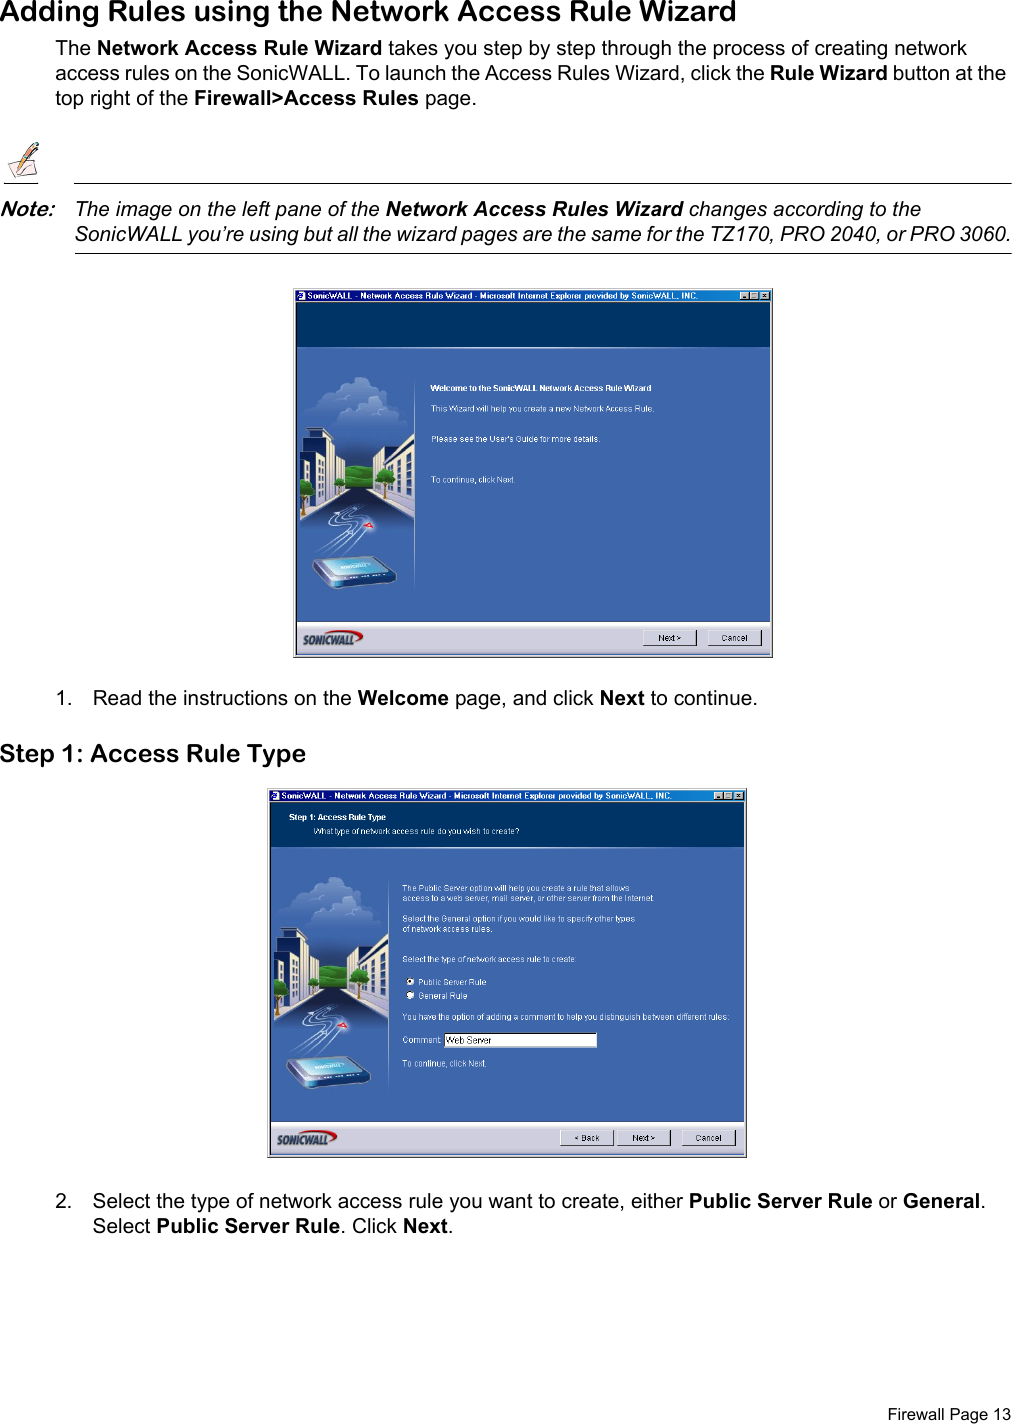  Firewall Page 13Adding Rules using the Network Access Rule WizardThe Network Access Rule Wizard takes you step by step through the process of creating network access rules on the SonicWALL. To launch the Access Rules Wizard, click the Rule Wizard button at the top right of the Firewall&gt;Access Rules page. Note:The image on the left pane of the Network Access Rules Wizard changes according to the SonicWALL you’re using but all the wizard pages are the same for the TZ170, PRO 2040, or PRO 3060.1. Read the instructions on the Welcome page, and click Next to continue.Step 1: Access Rule Type2. Select the type of network access rule you want to create, either Public Server Rule or General. Select Public Server Rule. Click Next. 